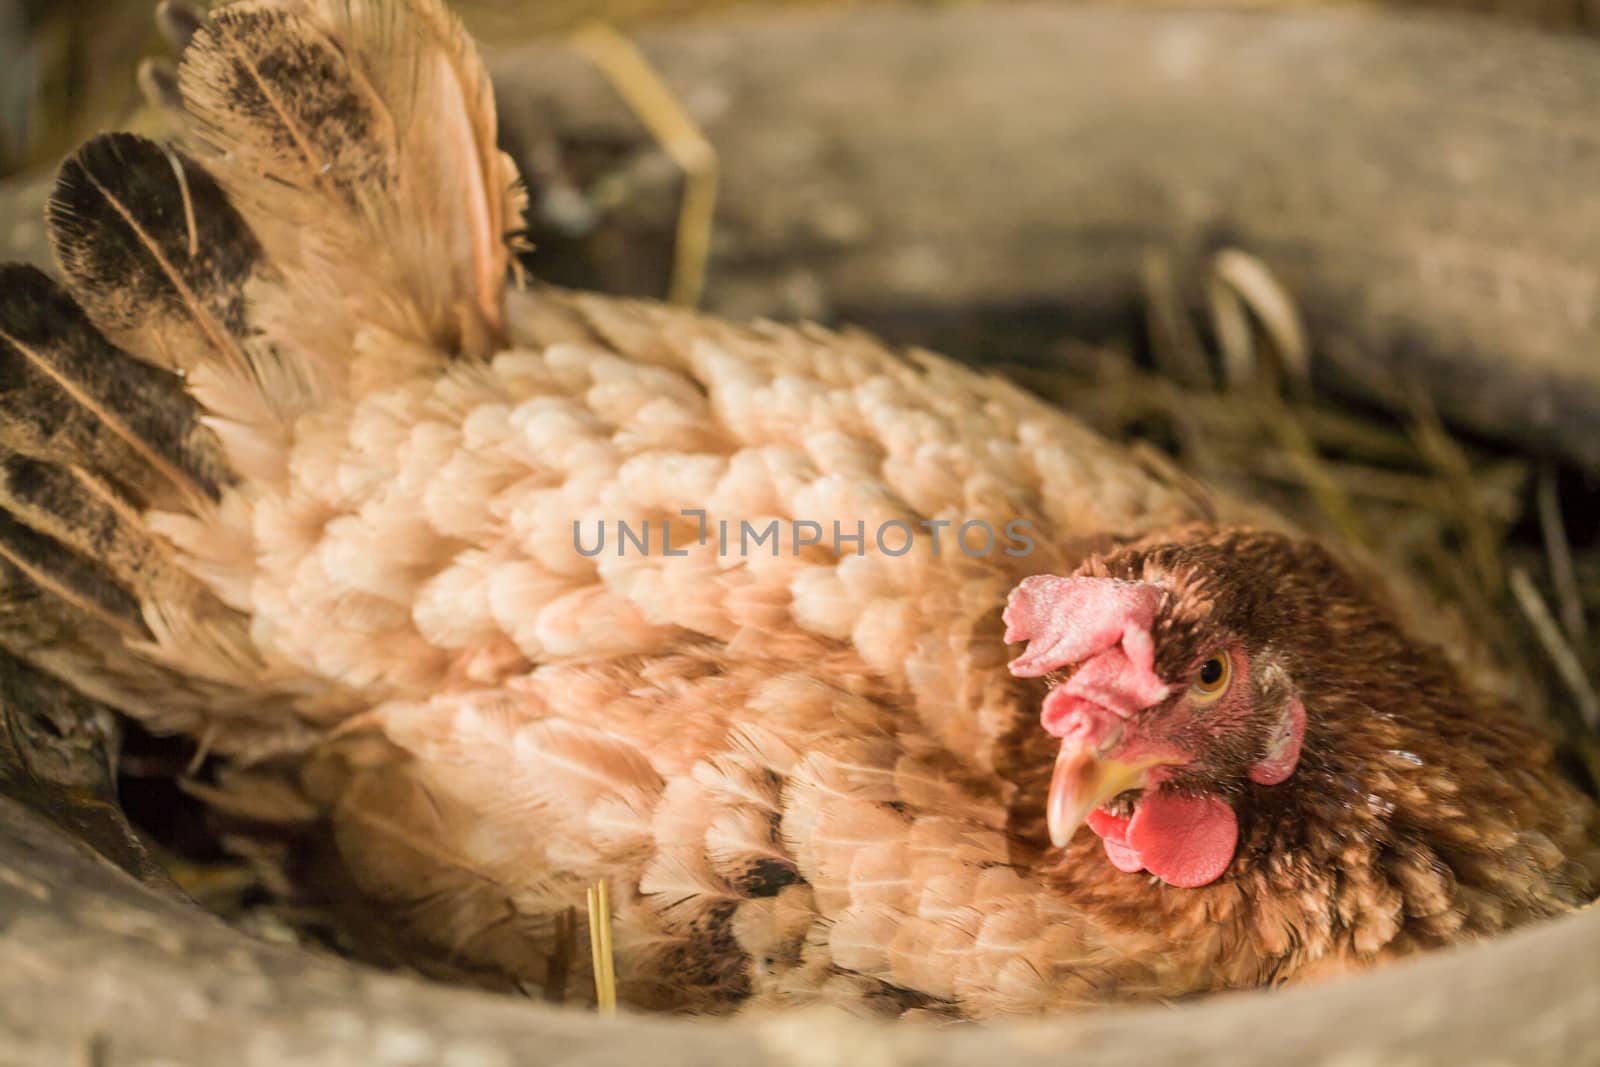 hen laying eggs in its nest, Incubate